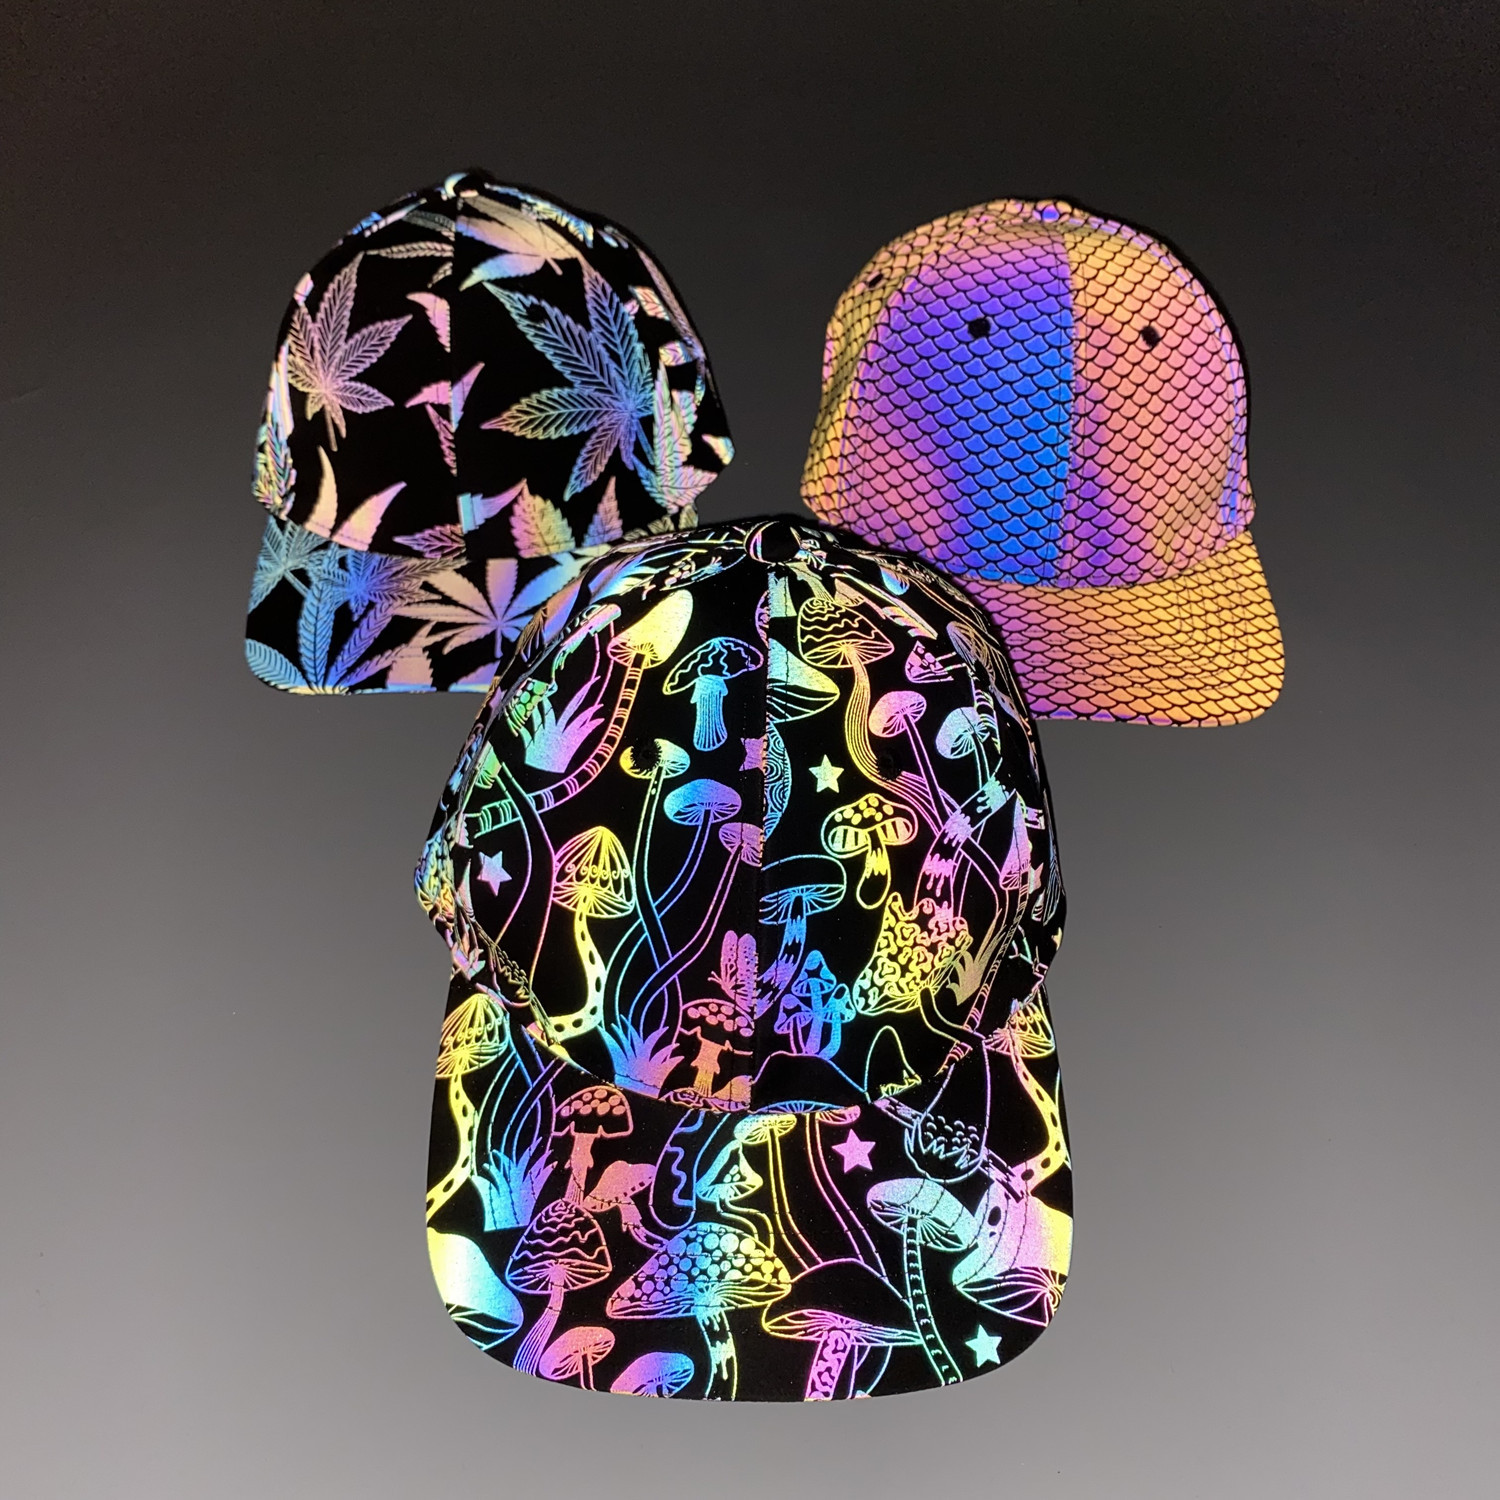 Ethnic Clothing Printed Reflective Baseball Cap European And American Glow-in-the-dark Colorful Cap